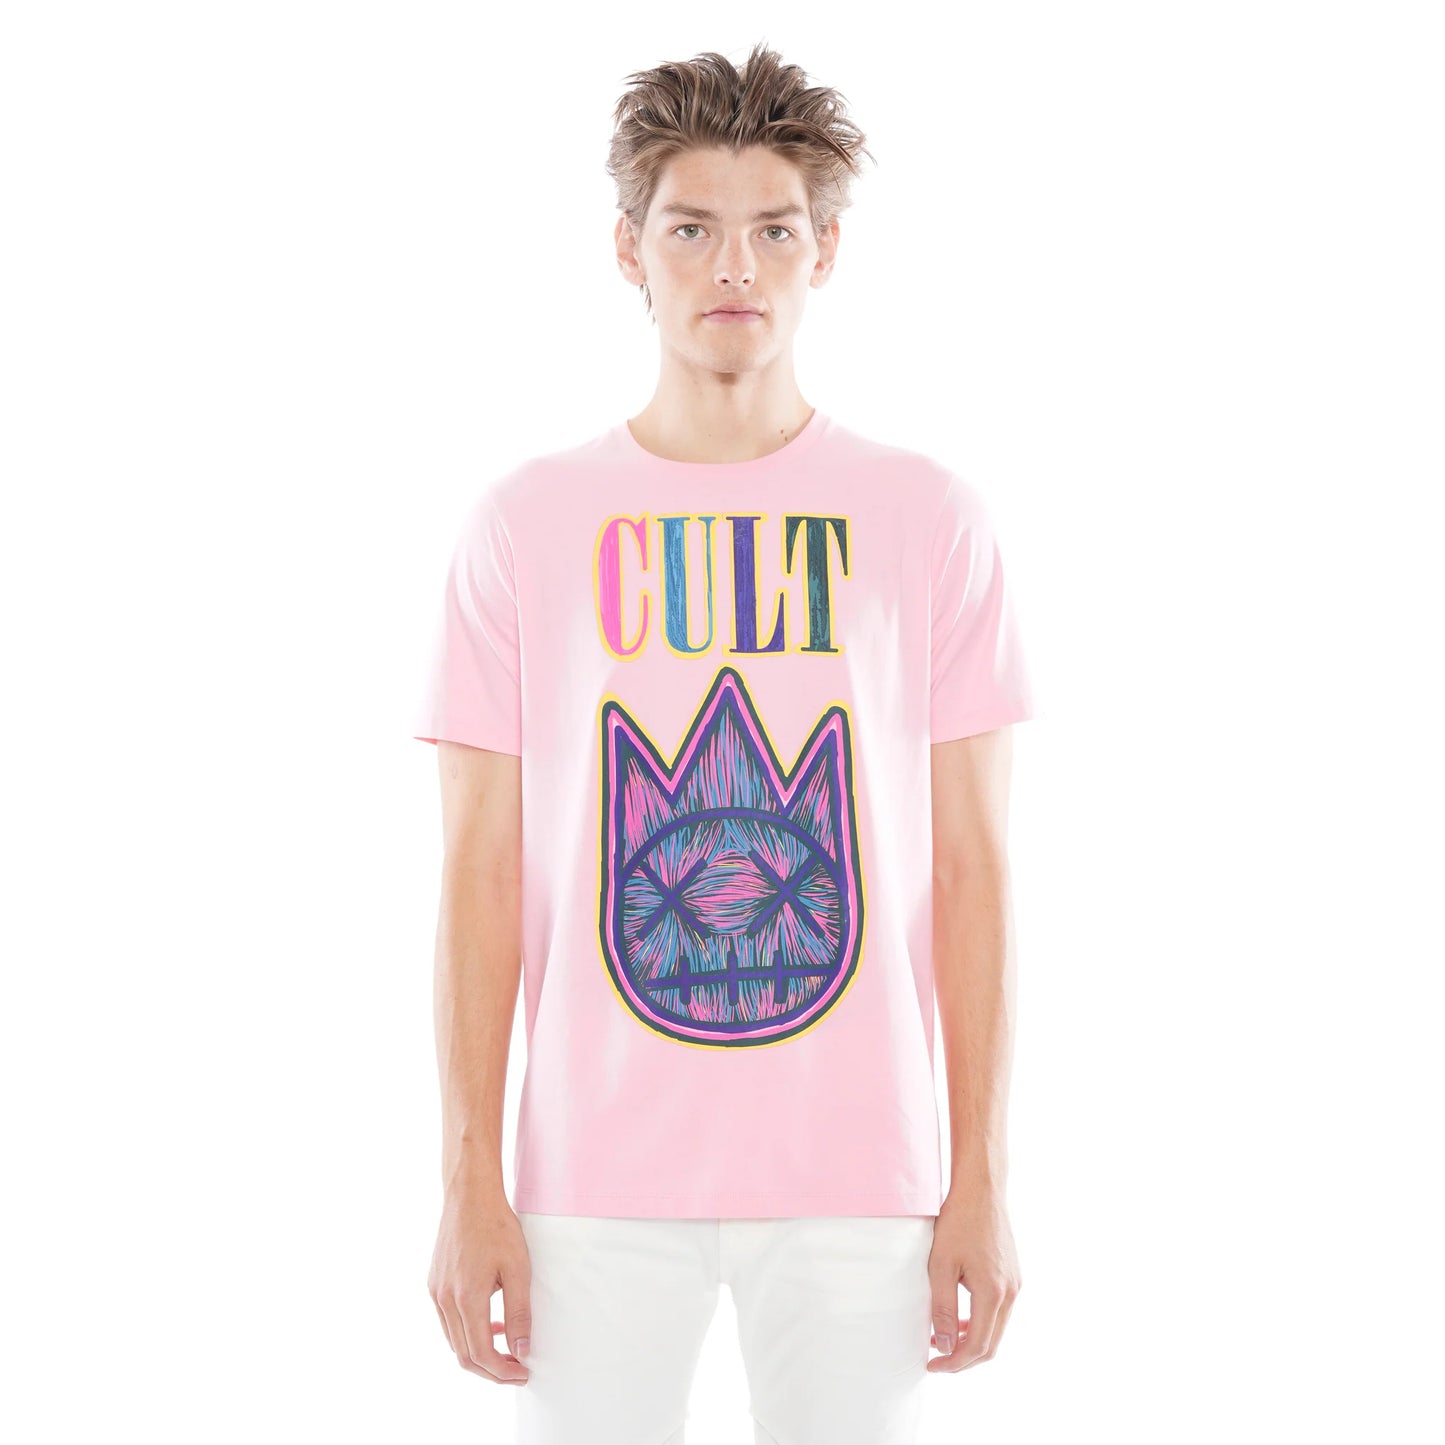 SHORT SLEEVE CREW NECK TEE "PASTEL LOGO" IN CANDY PINK